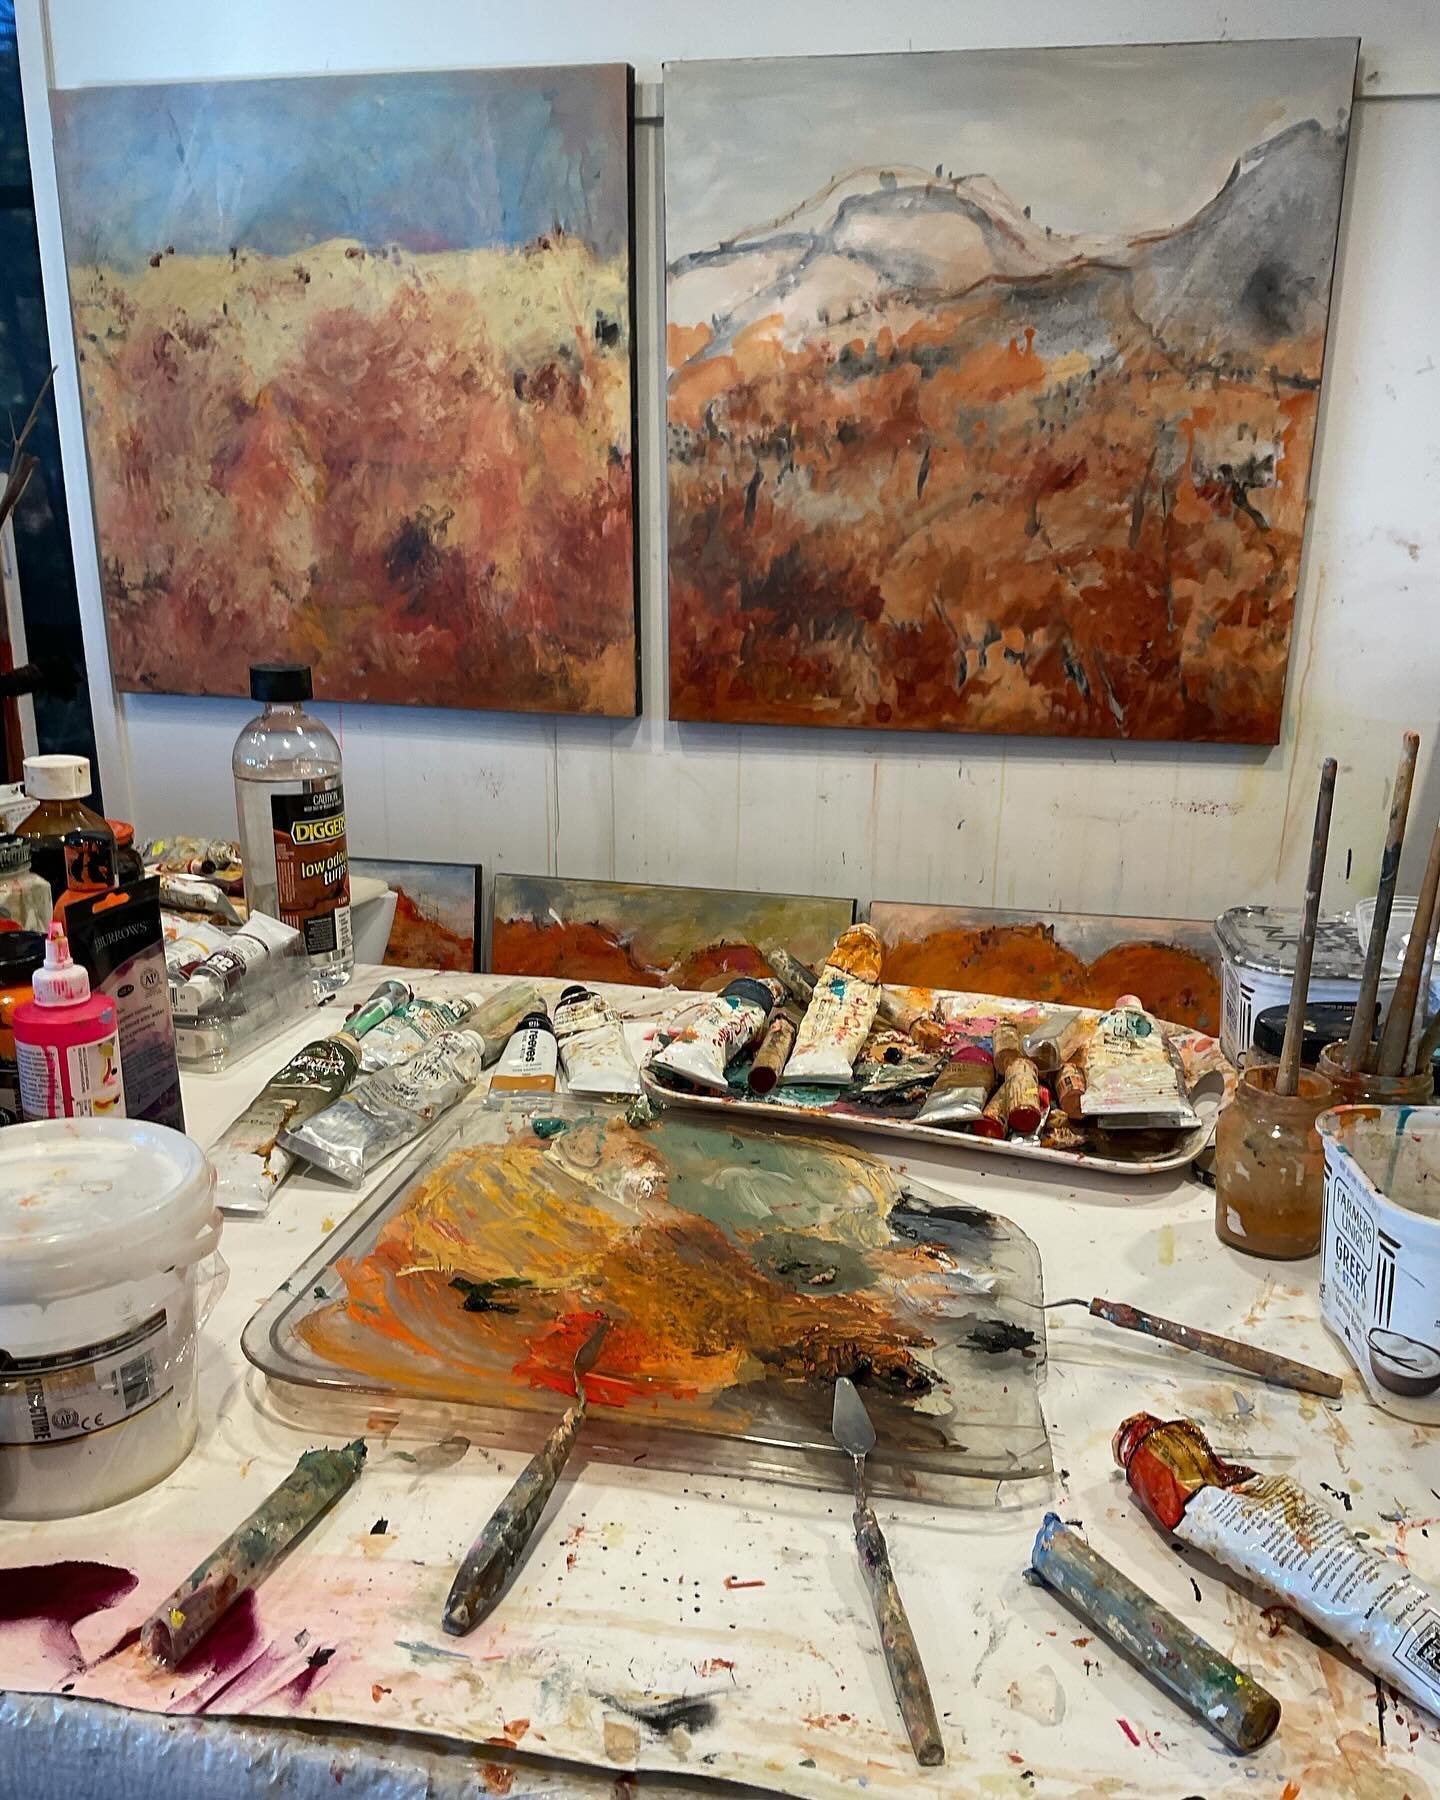 On the wall &amp; on the floor&hellip;all getting a bit of attention today&hellip;have the oils,oil sticks &amp; cold wax medium going&hellip;the larger ones are 76 x 76 cm &amp; smaller 60 x 60 cm unframed.
.
.SLIDE for more 
.
.
#oilsandcoldwax #co